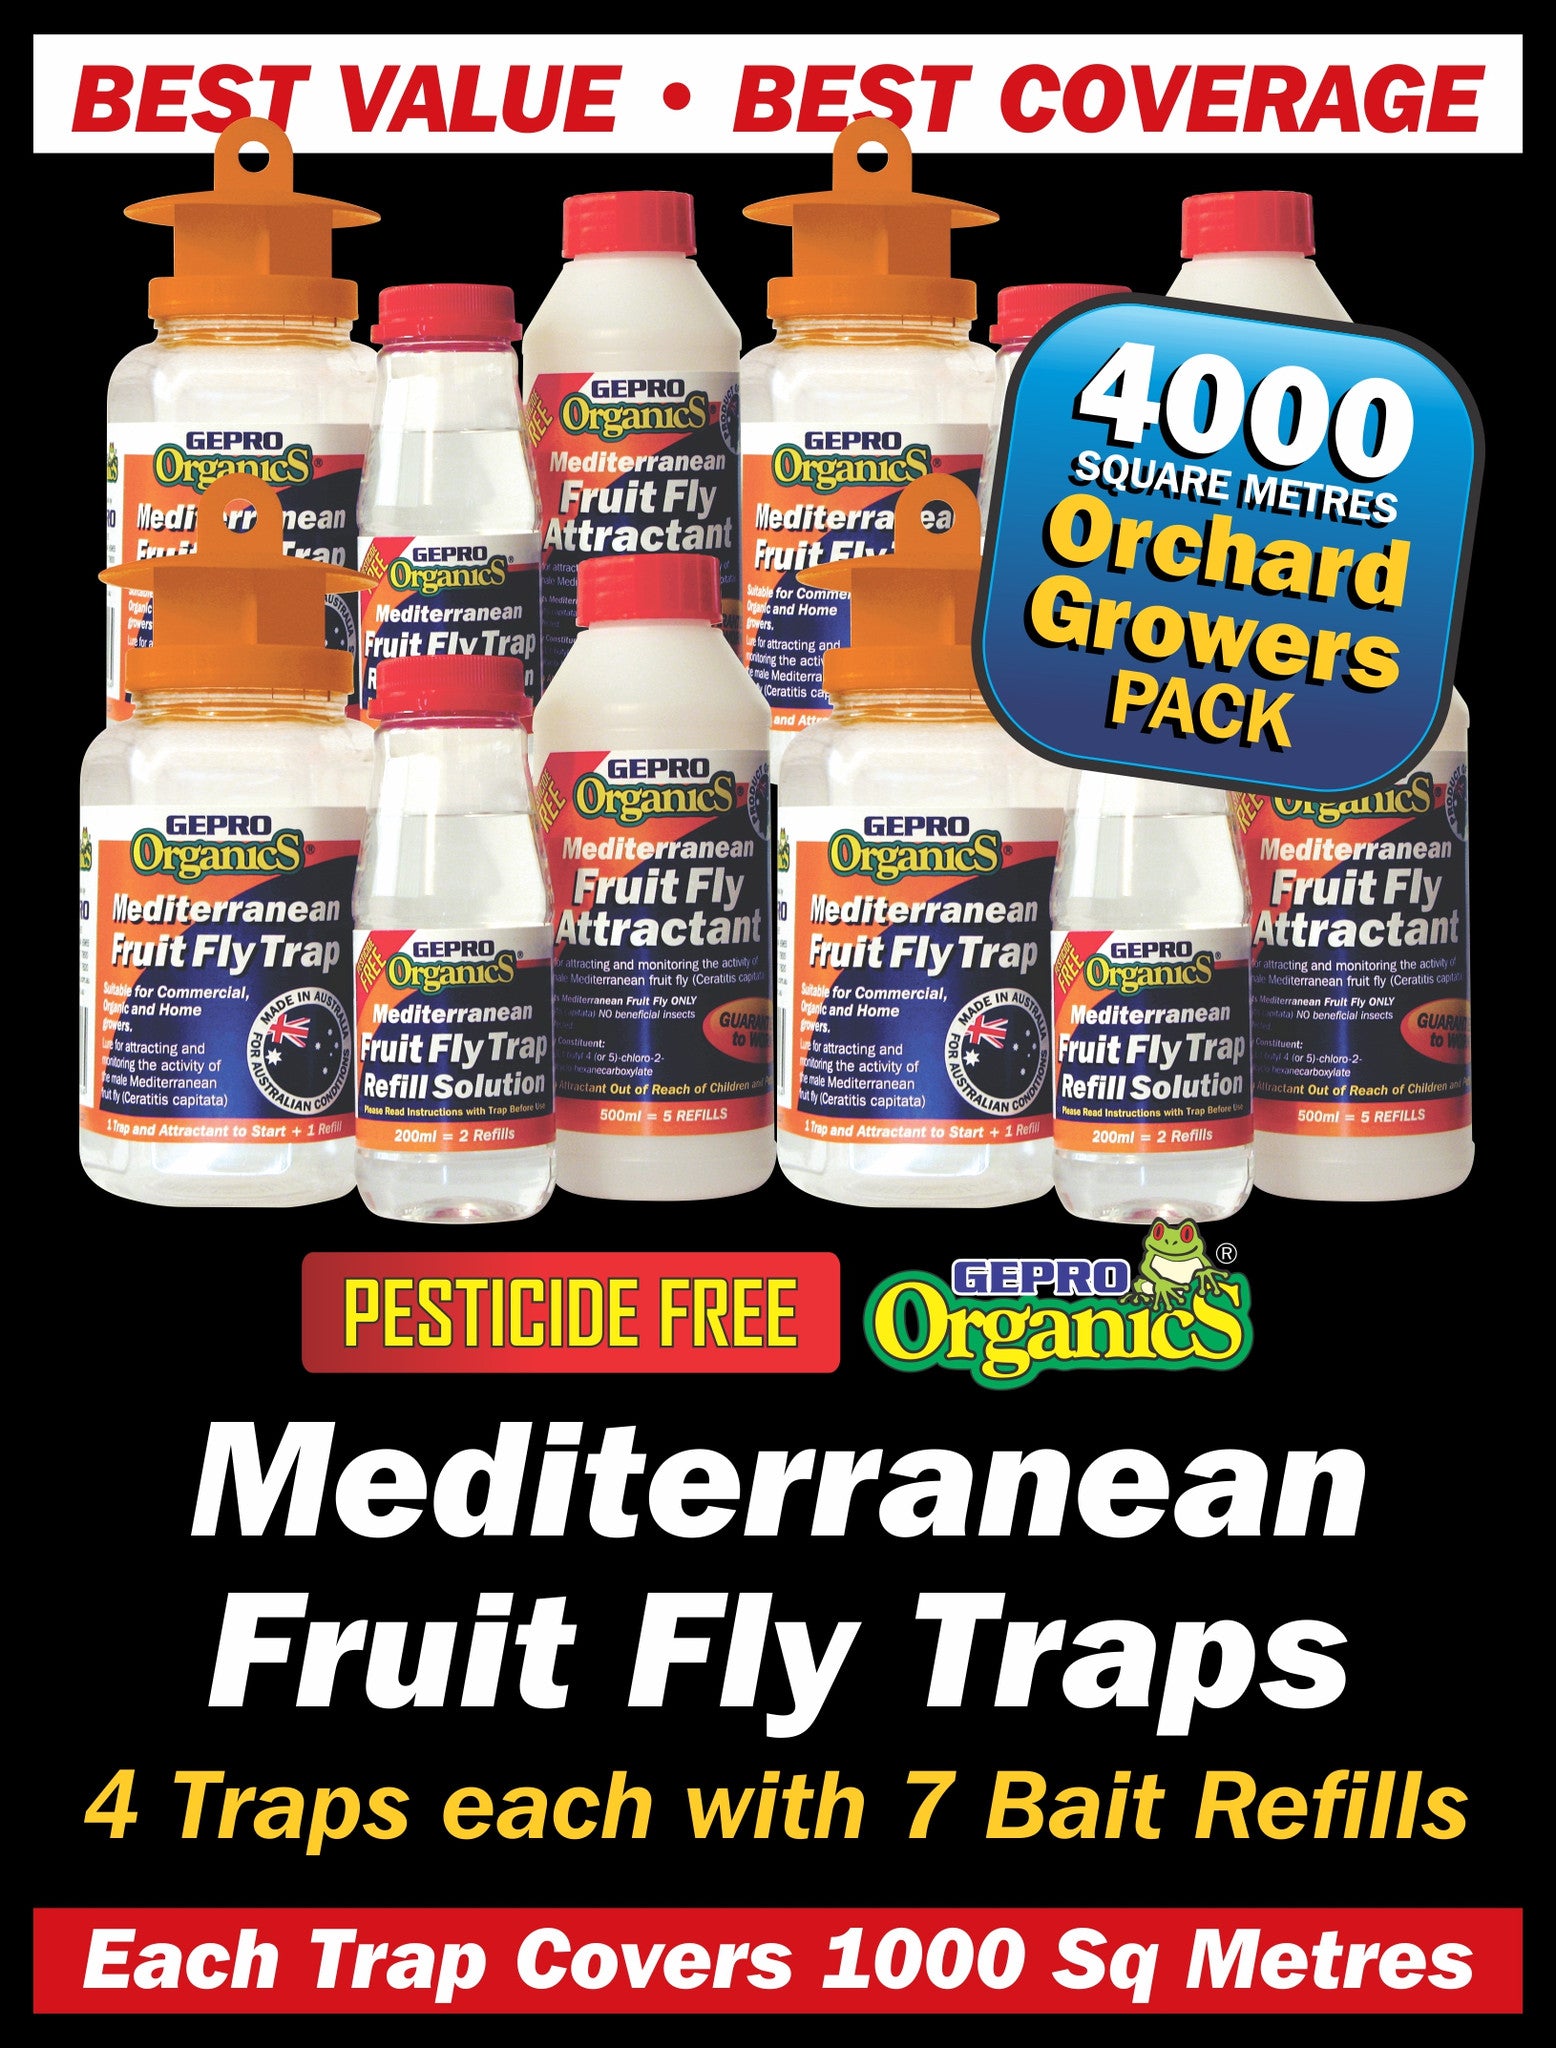 West Australian Mediterranean Fruit Fly Trap Orchard Growers Pack 4000 Square Metre Coverage